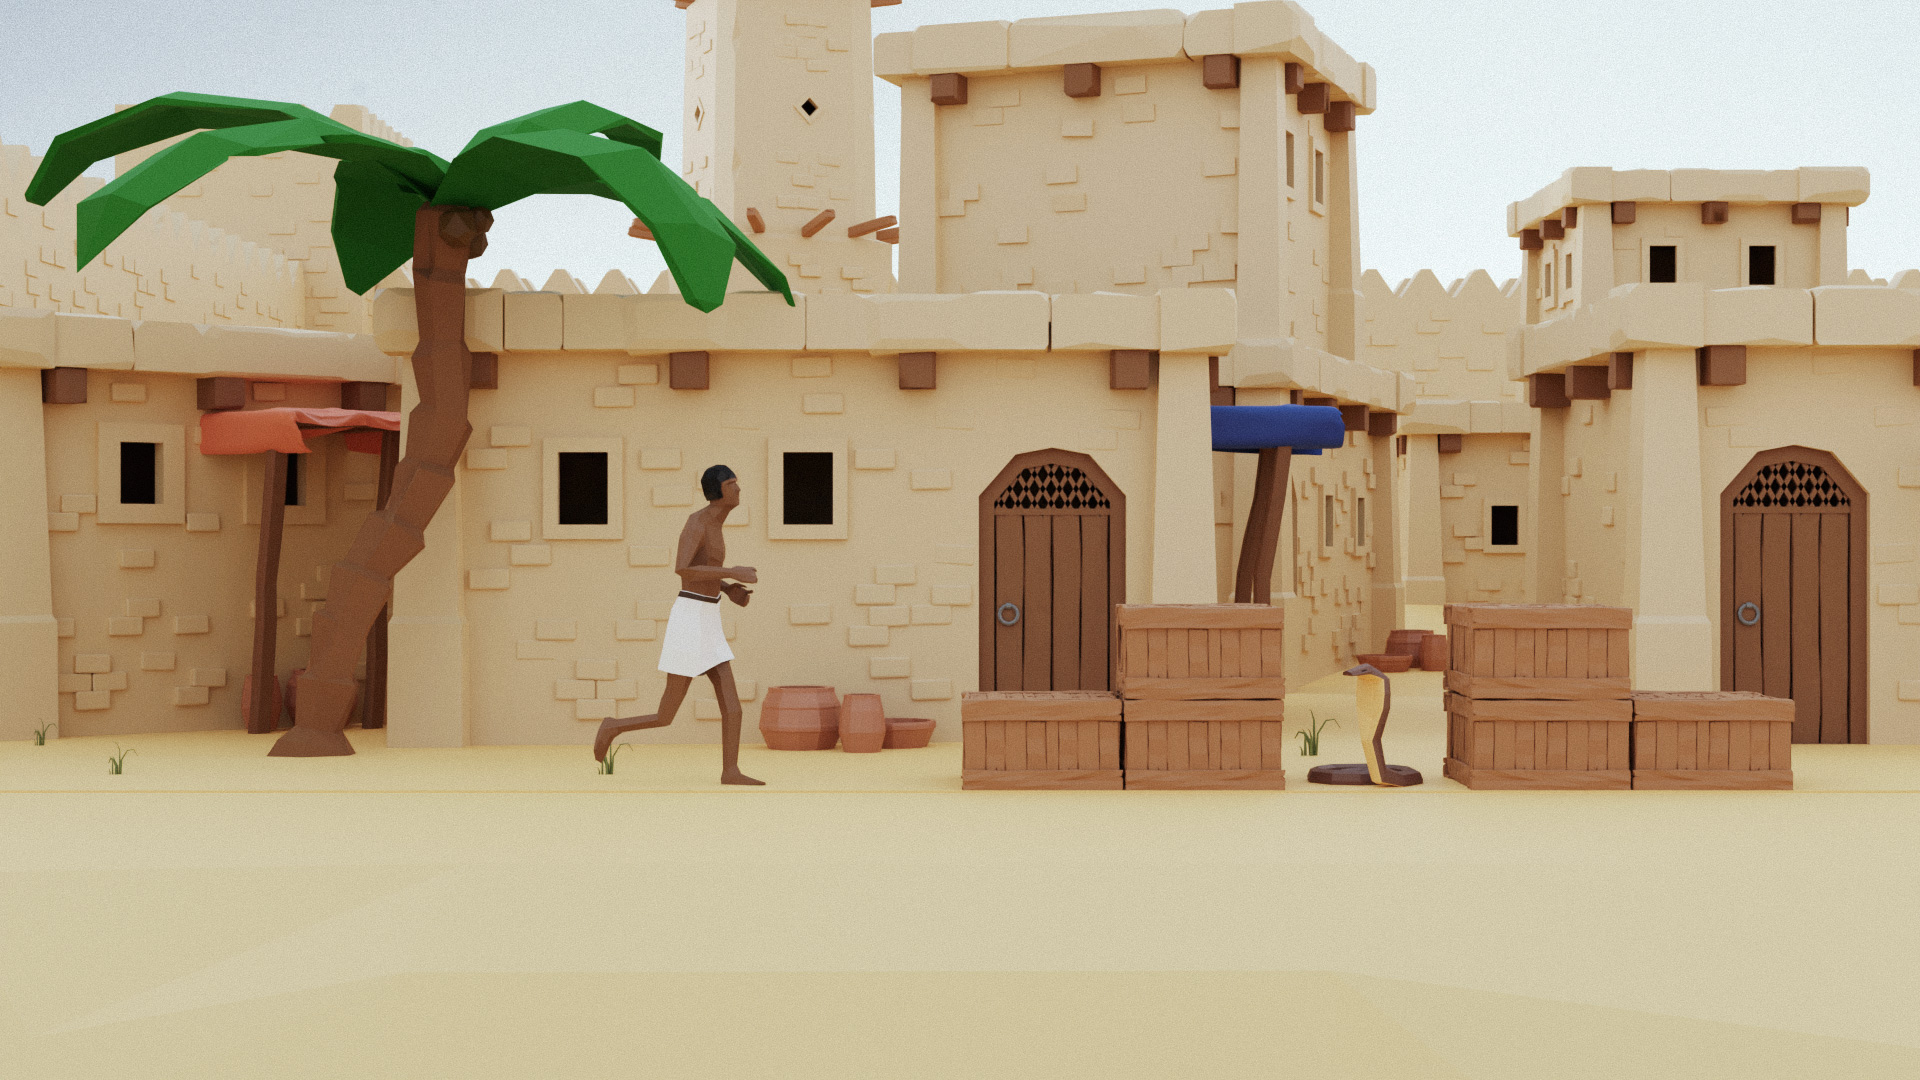 Screenshot of the game "Along the Nile" where the protagonist is running through an Egyptian city.